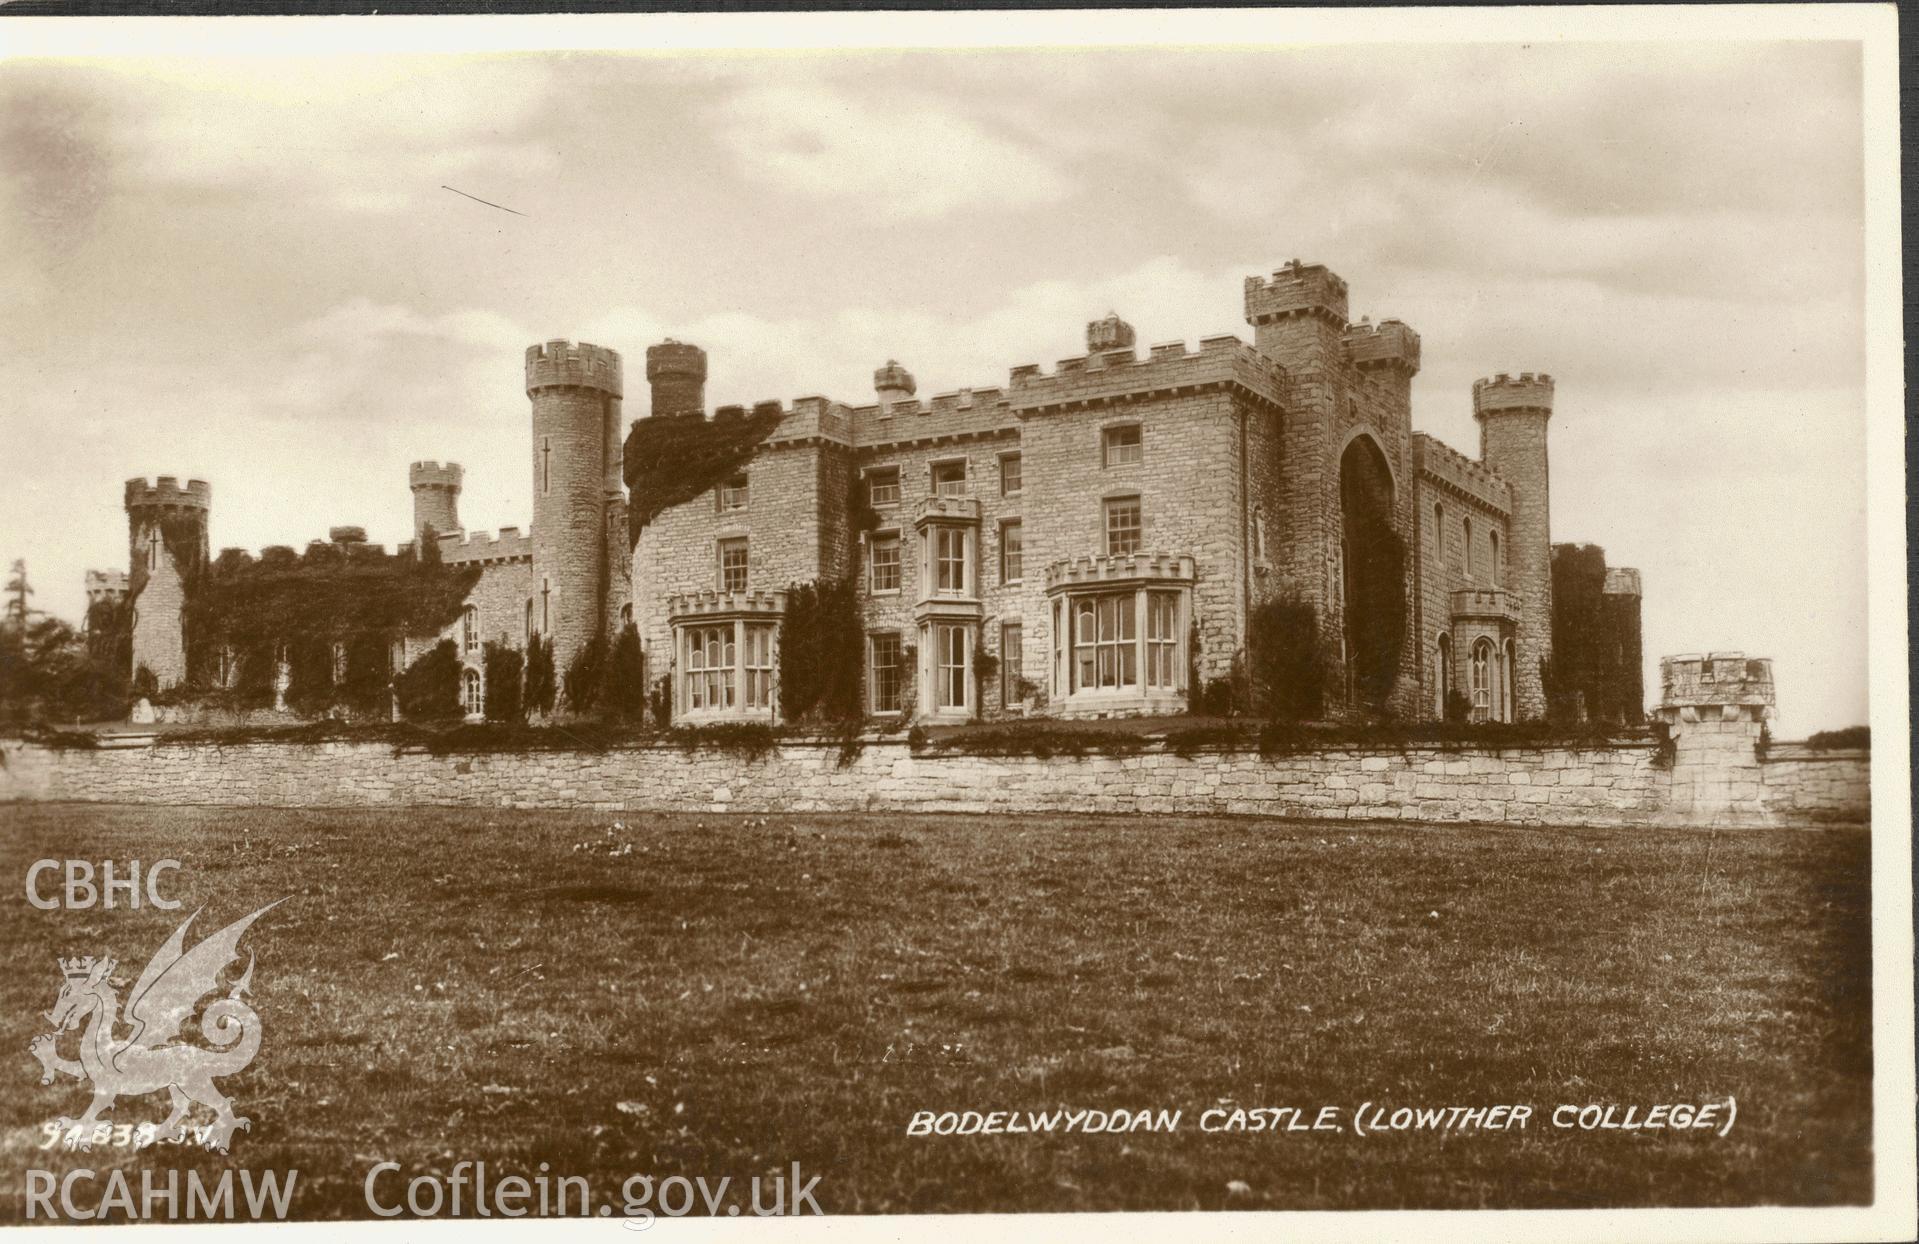 Digitised postcard image of Bodelwyddan Castle / Lowther College, Valentine's Series. Produced by Parks and Gardens Data Services, from an original item in the Peter Davis Collection at Parks and Gardens UK. We hold only web-resolution images of this collection, suitable for viewing on screen and for research purposes only. We do not hold the original images, or publication quality scans.